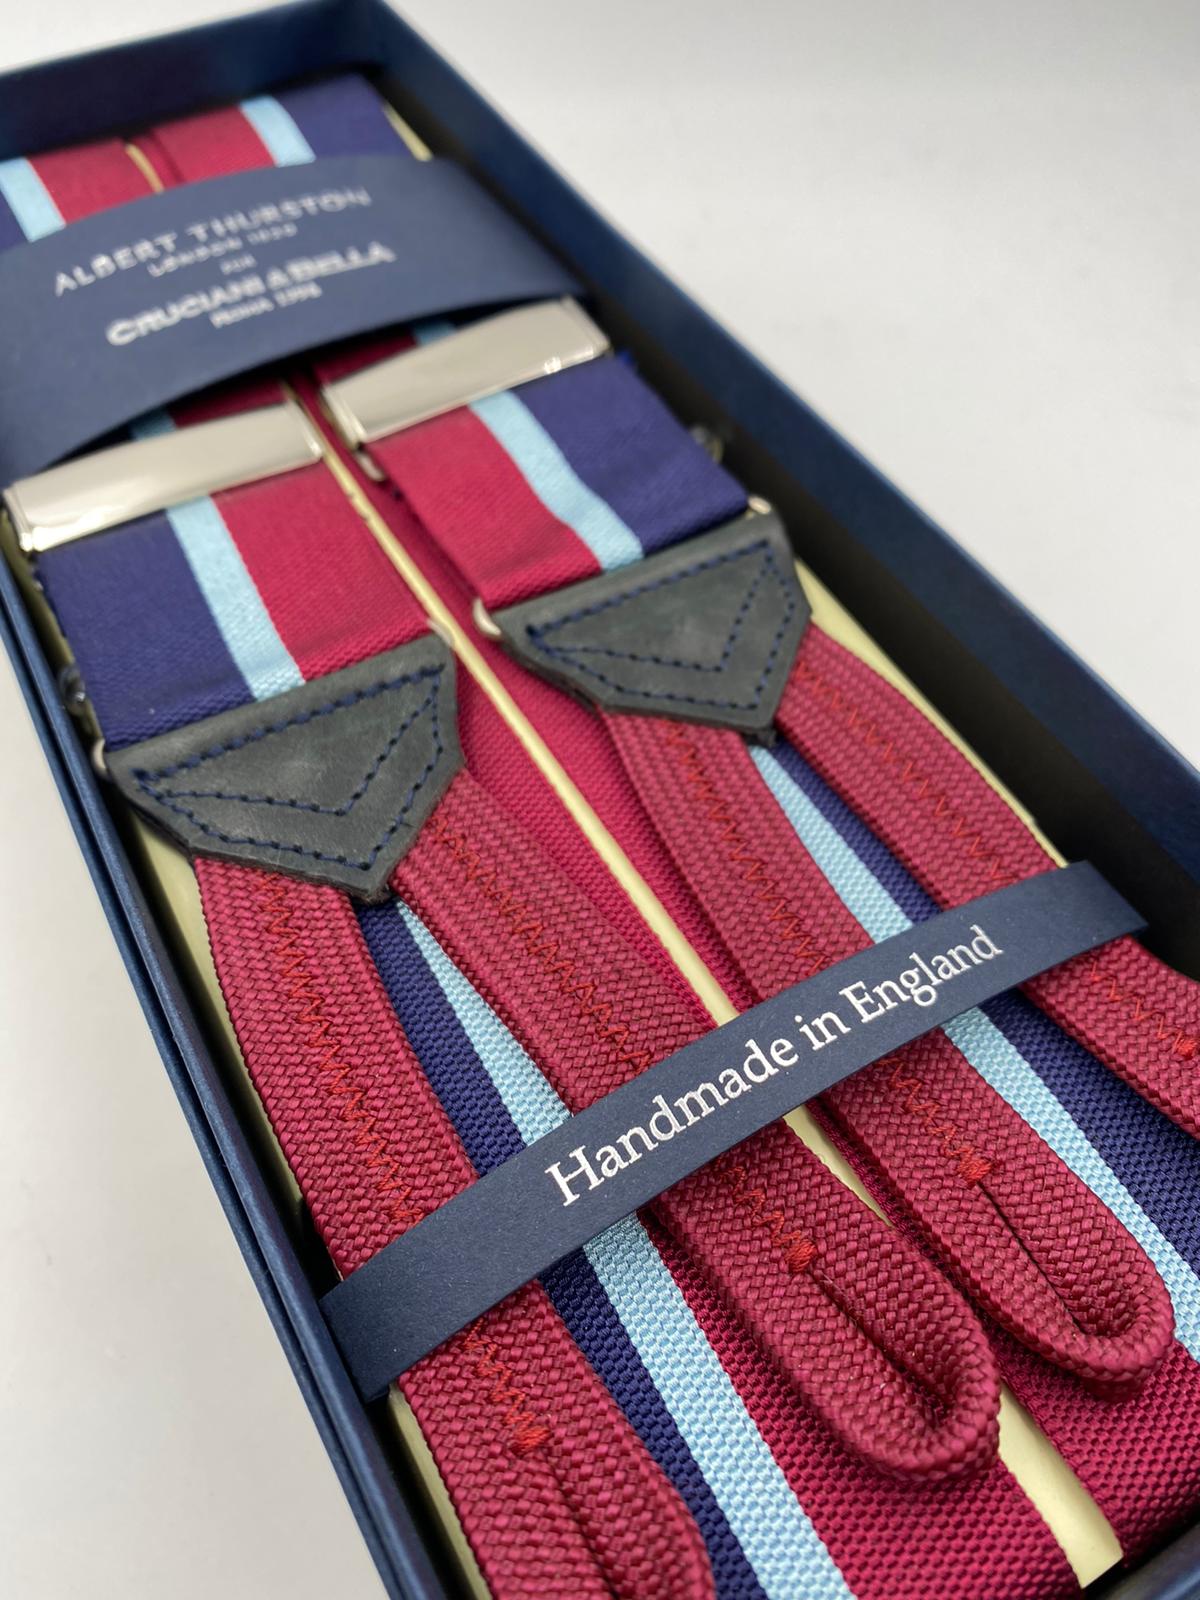 Albert Thurston for Cruciani & Bella Made in England Adjustable Sizing 40 mm Woven Barathea  Blue, Sky Blue and Red Stripes Braces Braid ends Y-Shaped Nickel Fittings Size: L #2366